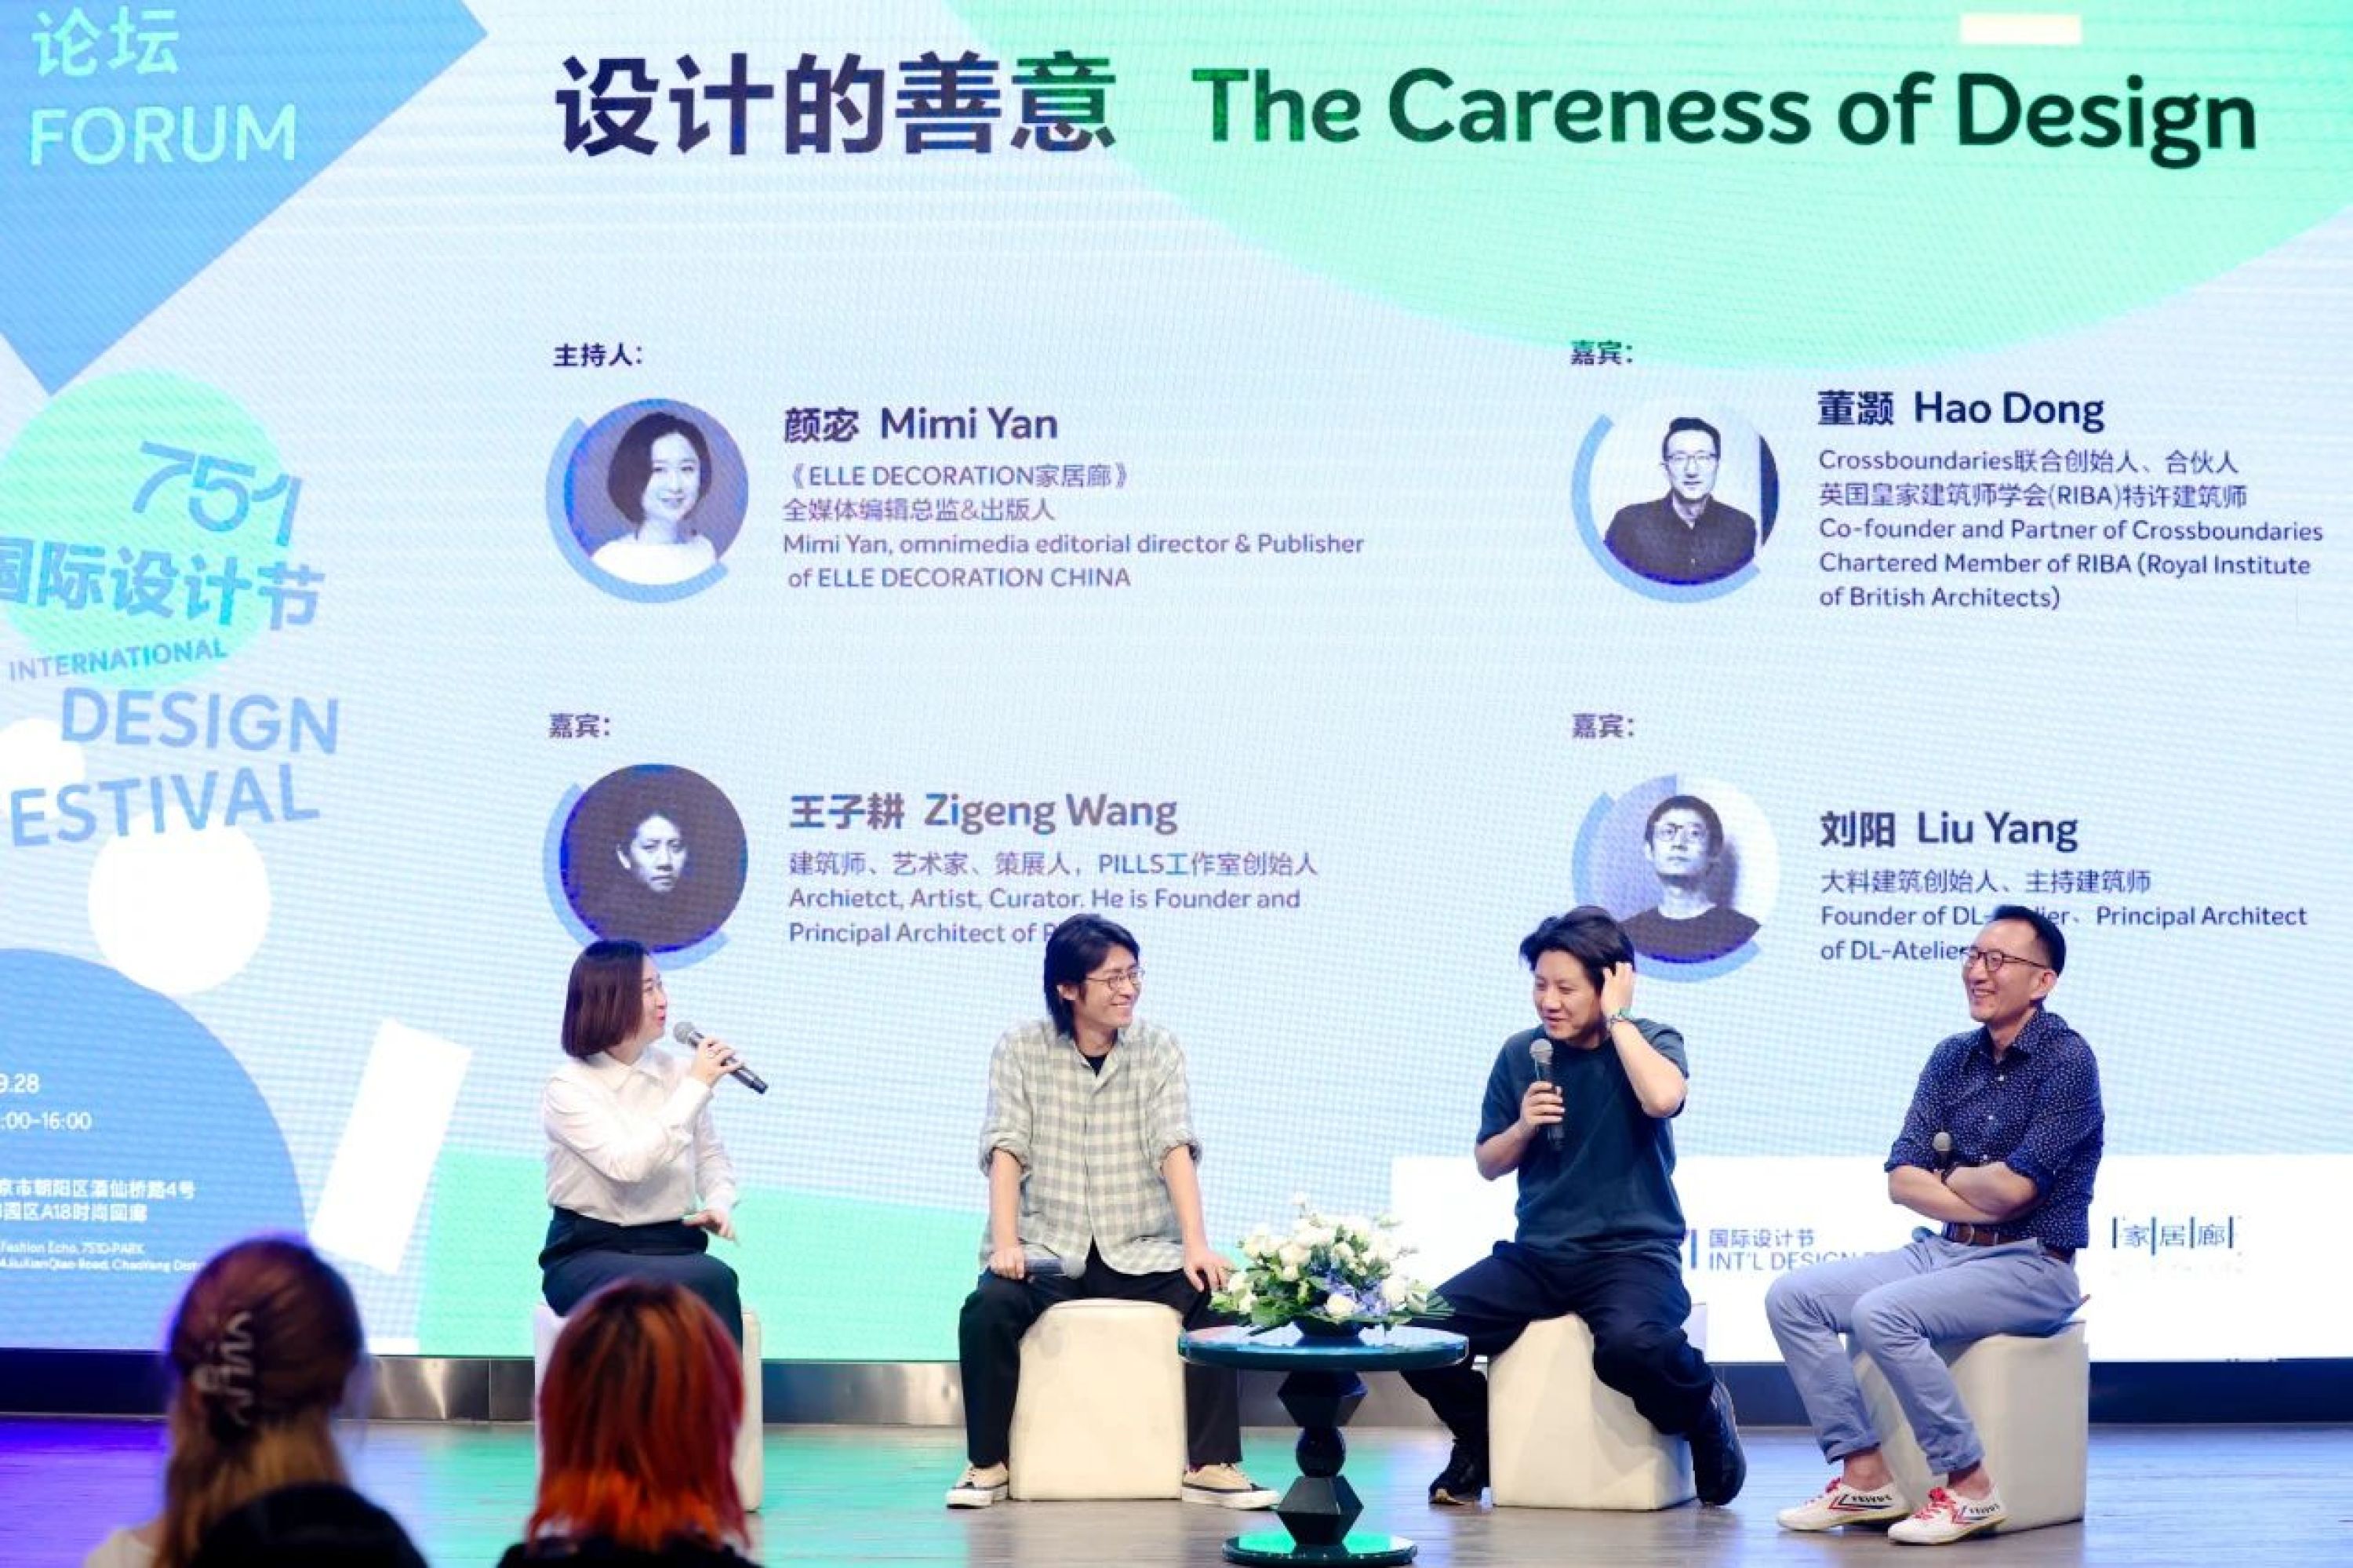 Zigeng Wang was Invited to Participate in the 751 International Design Festival's ELLE DECORATION Themed Forum on “The Careness of Design"